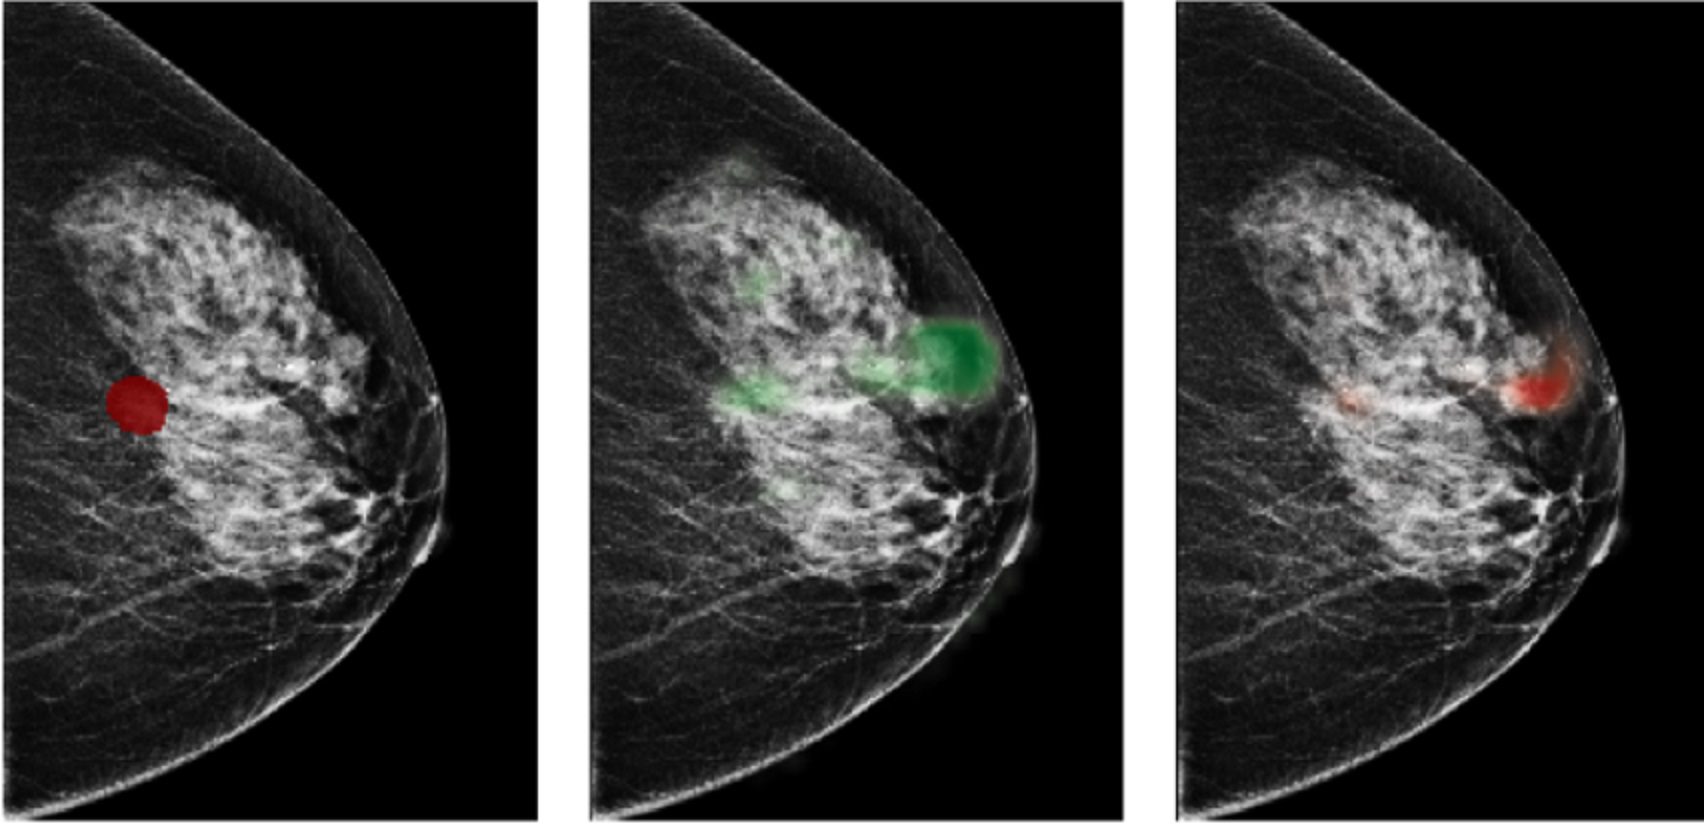 Utilizing Deep Learning to Mitigate False Positives in Screening Mammography